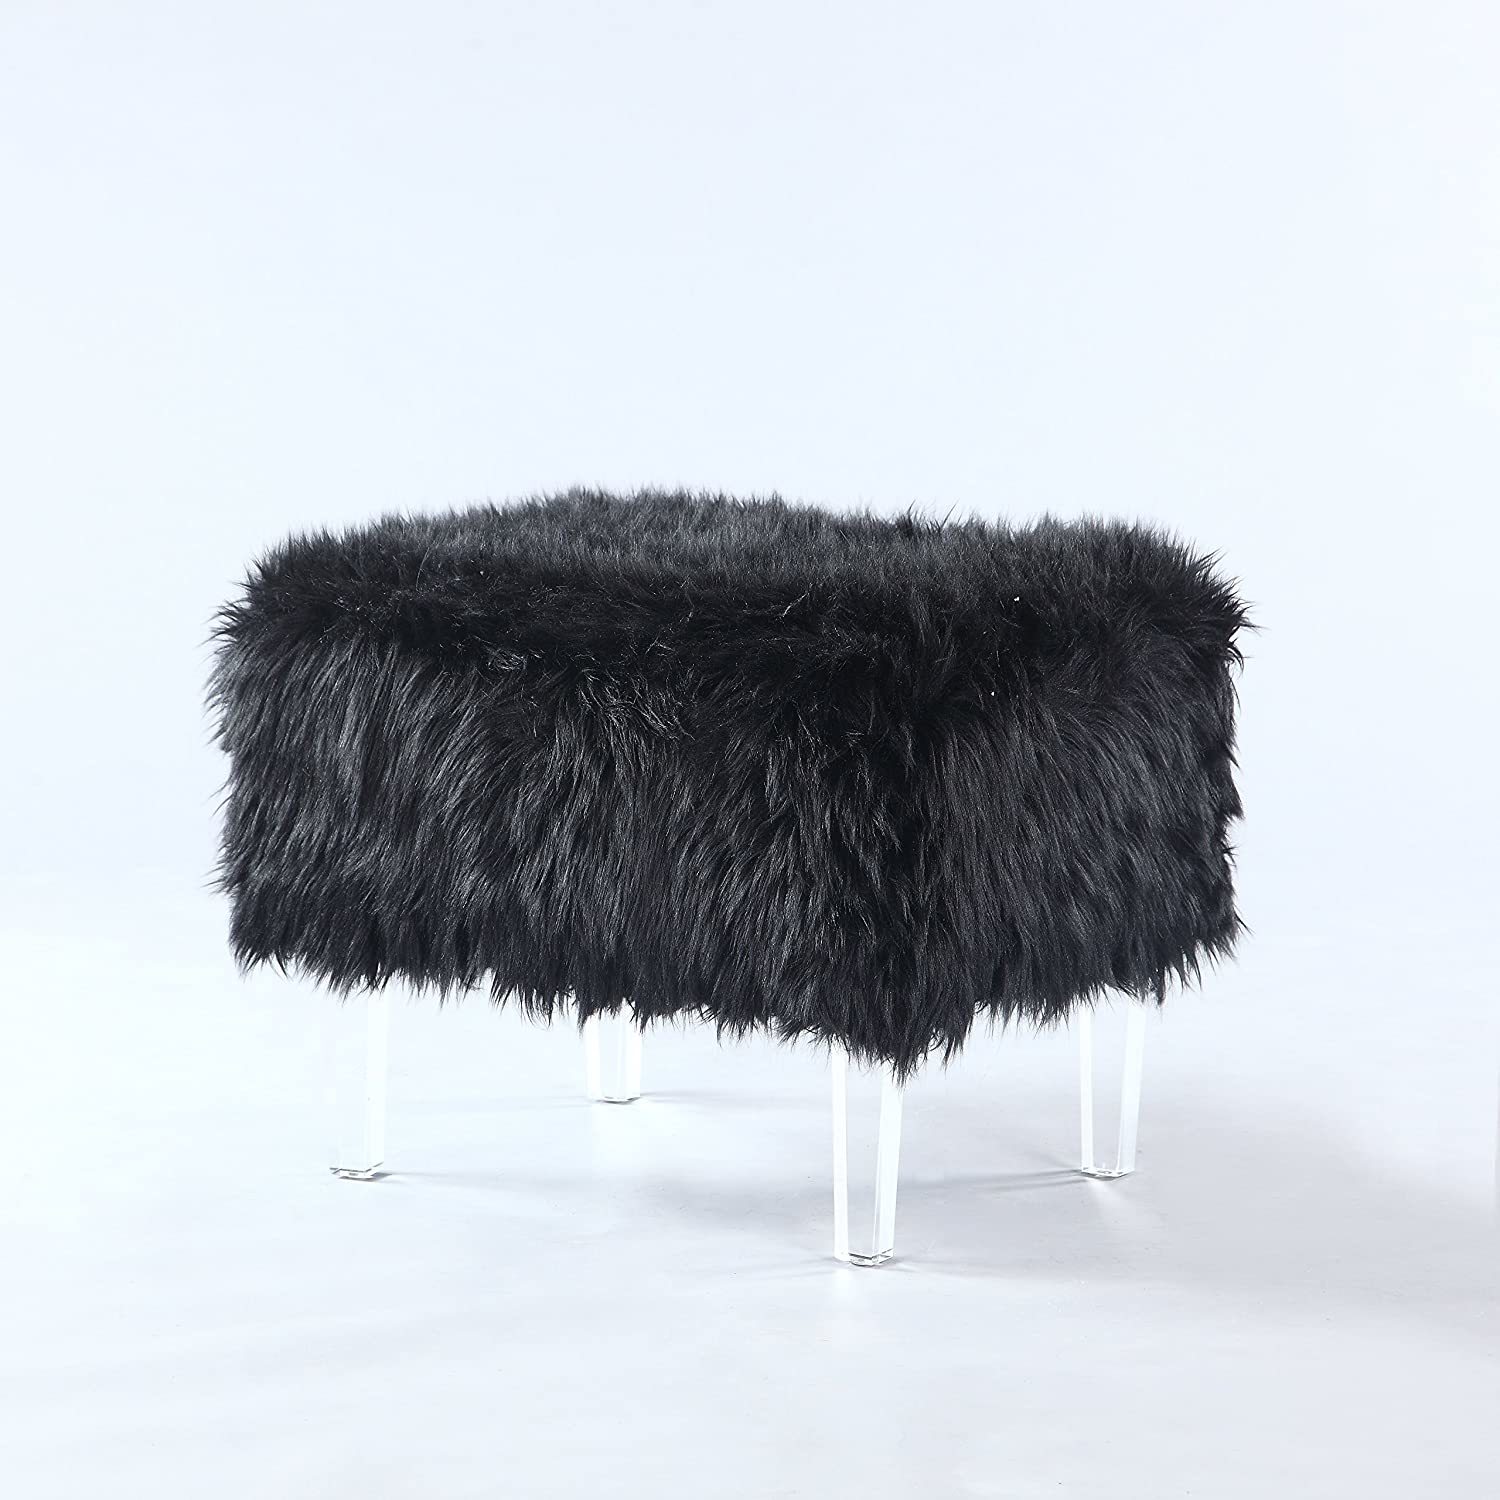 Primary image for The Black Fiorino Modern Contemporary Faux Fur Acrylic Leg Ottoman From Iconic